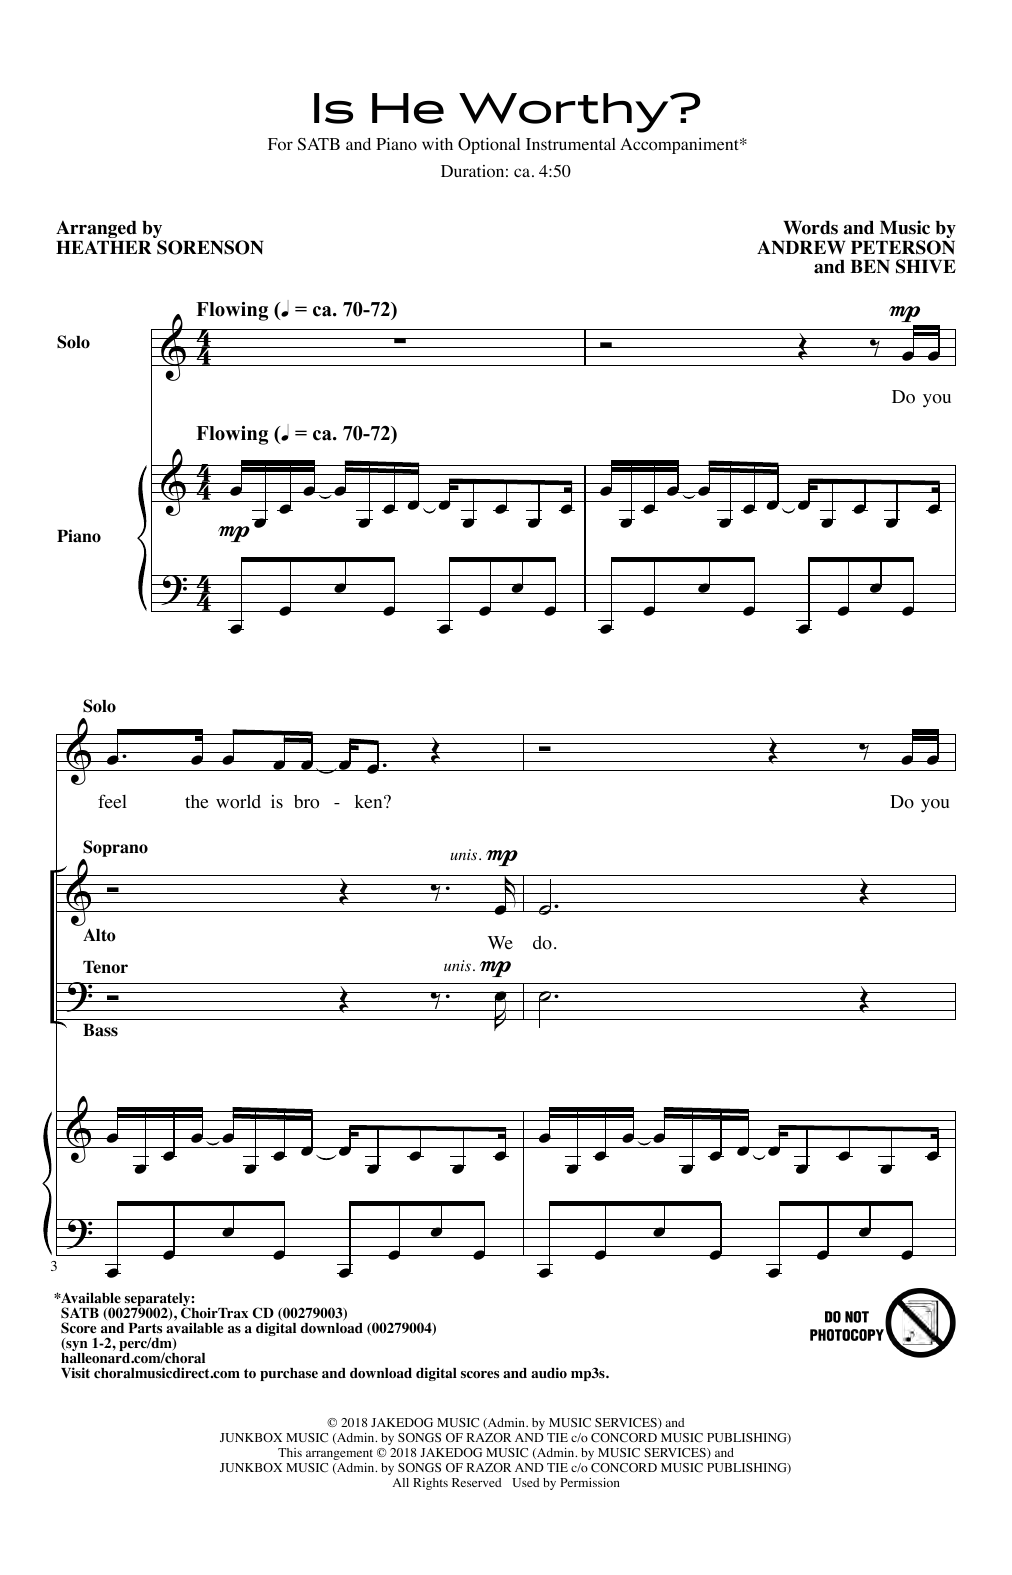 Andrew Peterson and Ben Shive Is He Worthy? (arr. Heather Sorenson) sheet music notes and chords. Download Printable PDF.